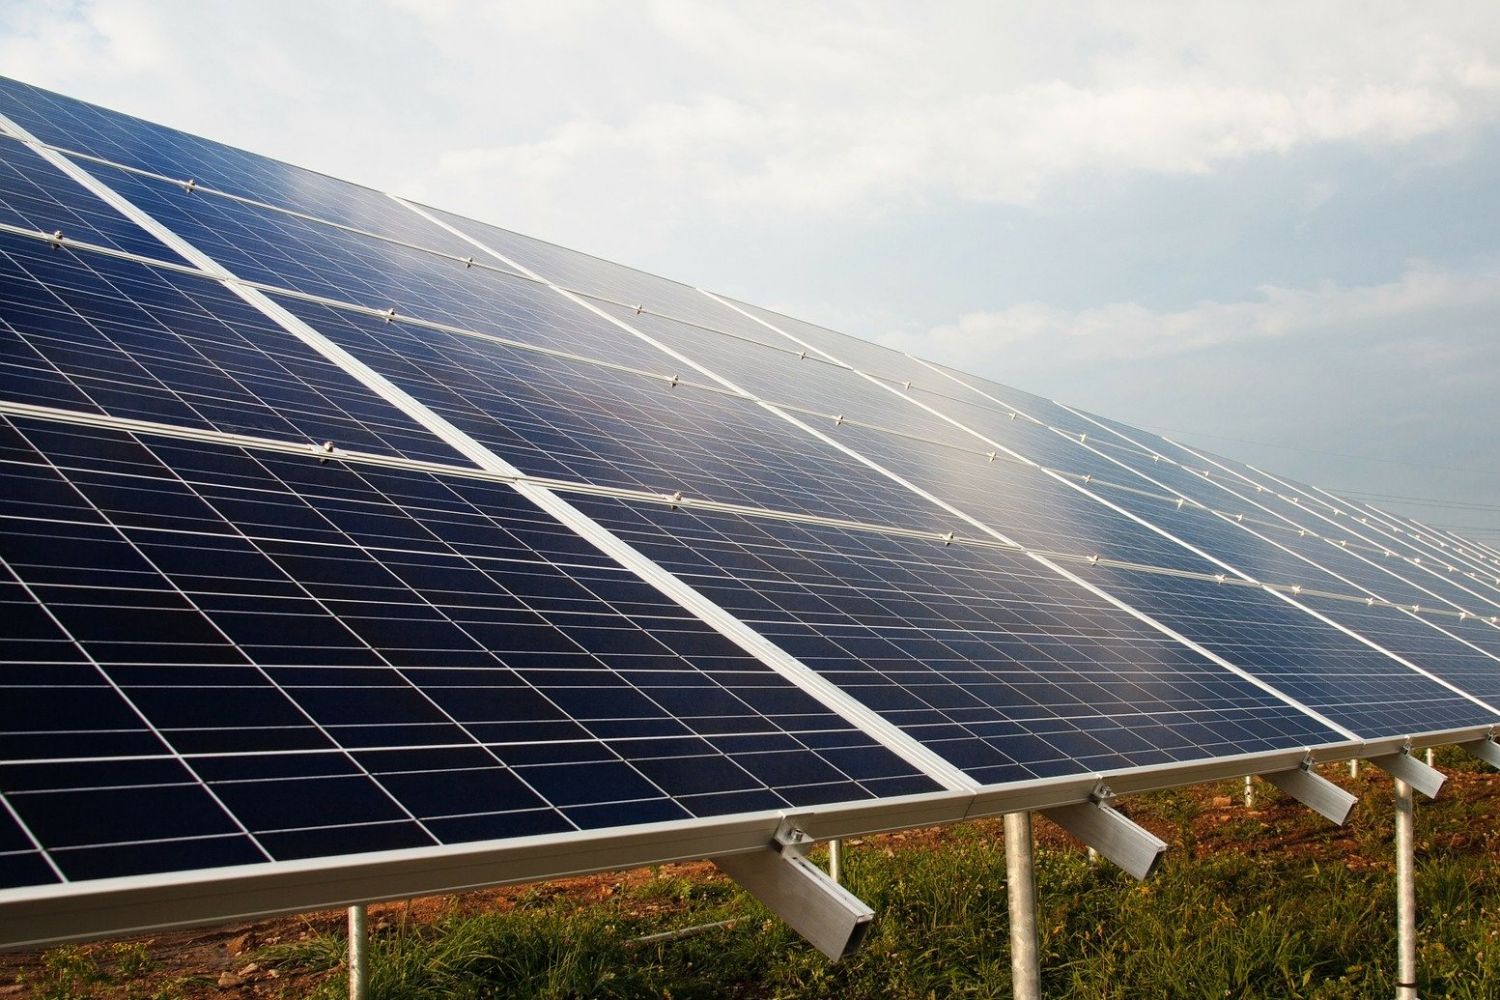 PADCON enters partnership with German solar specialist